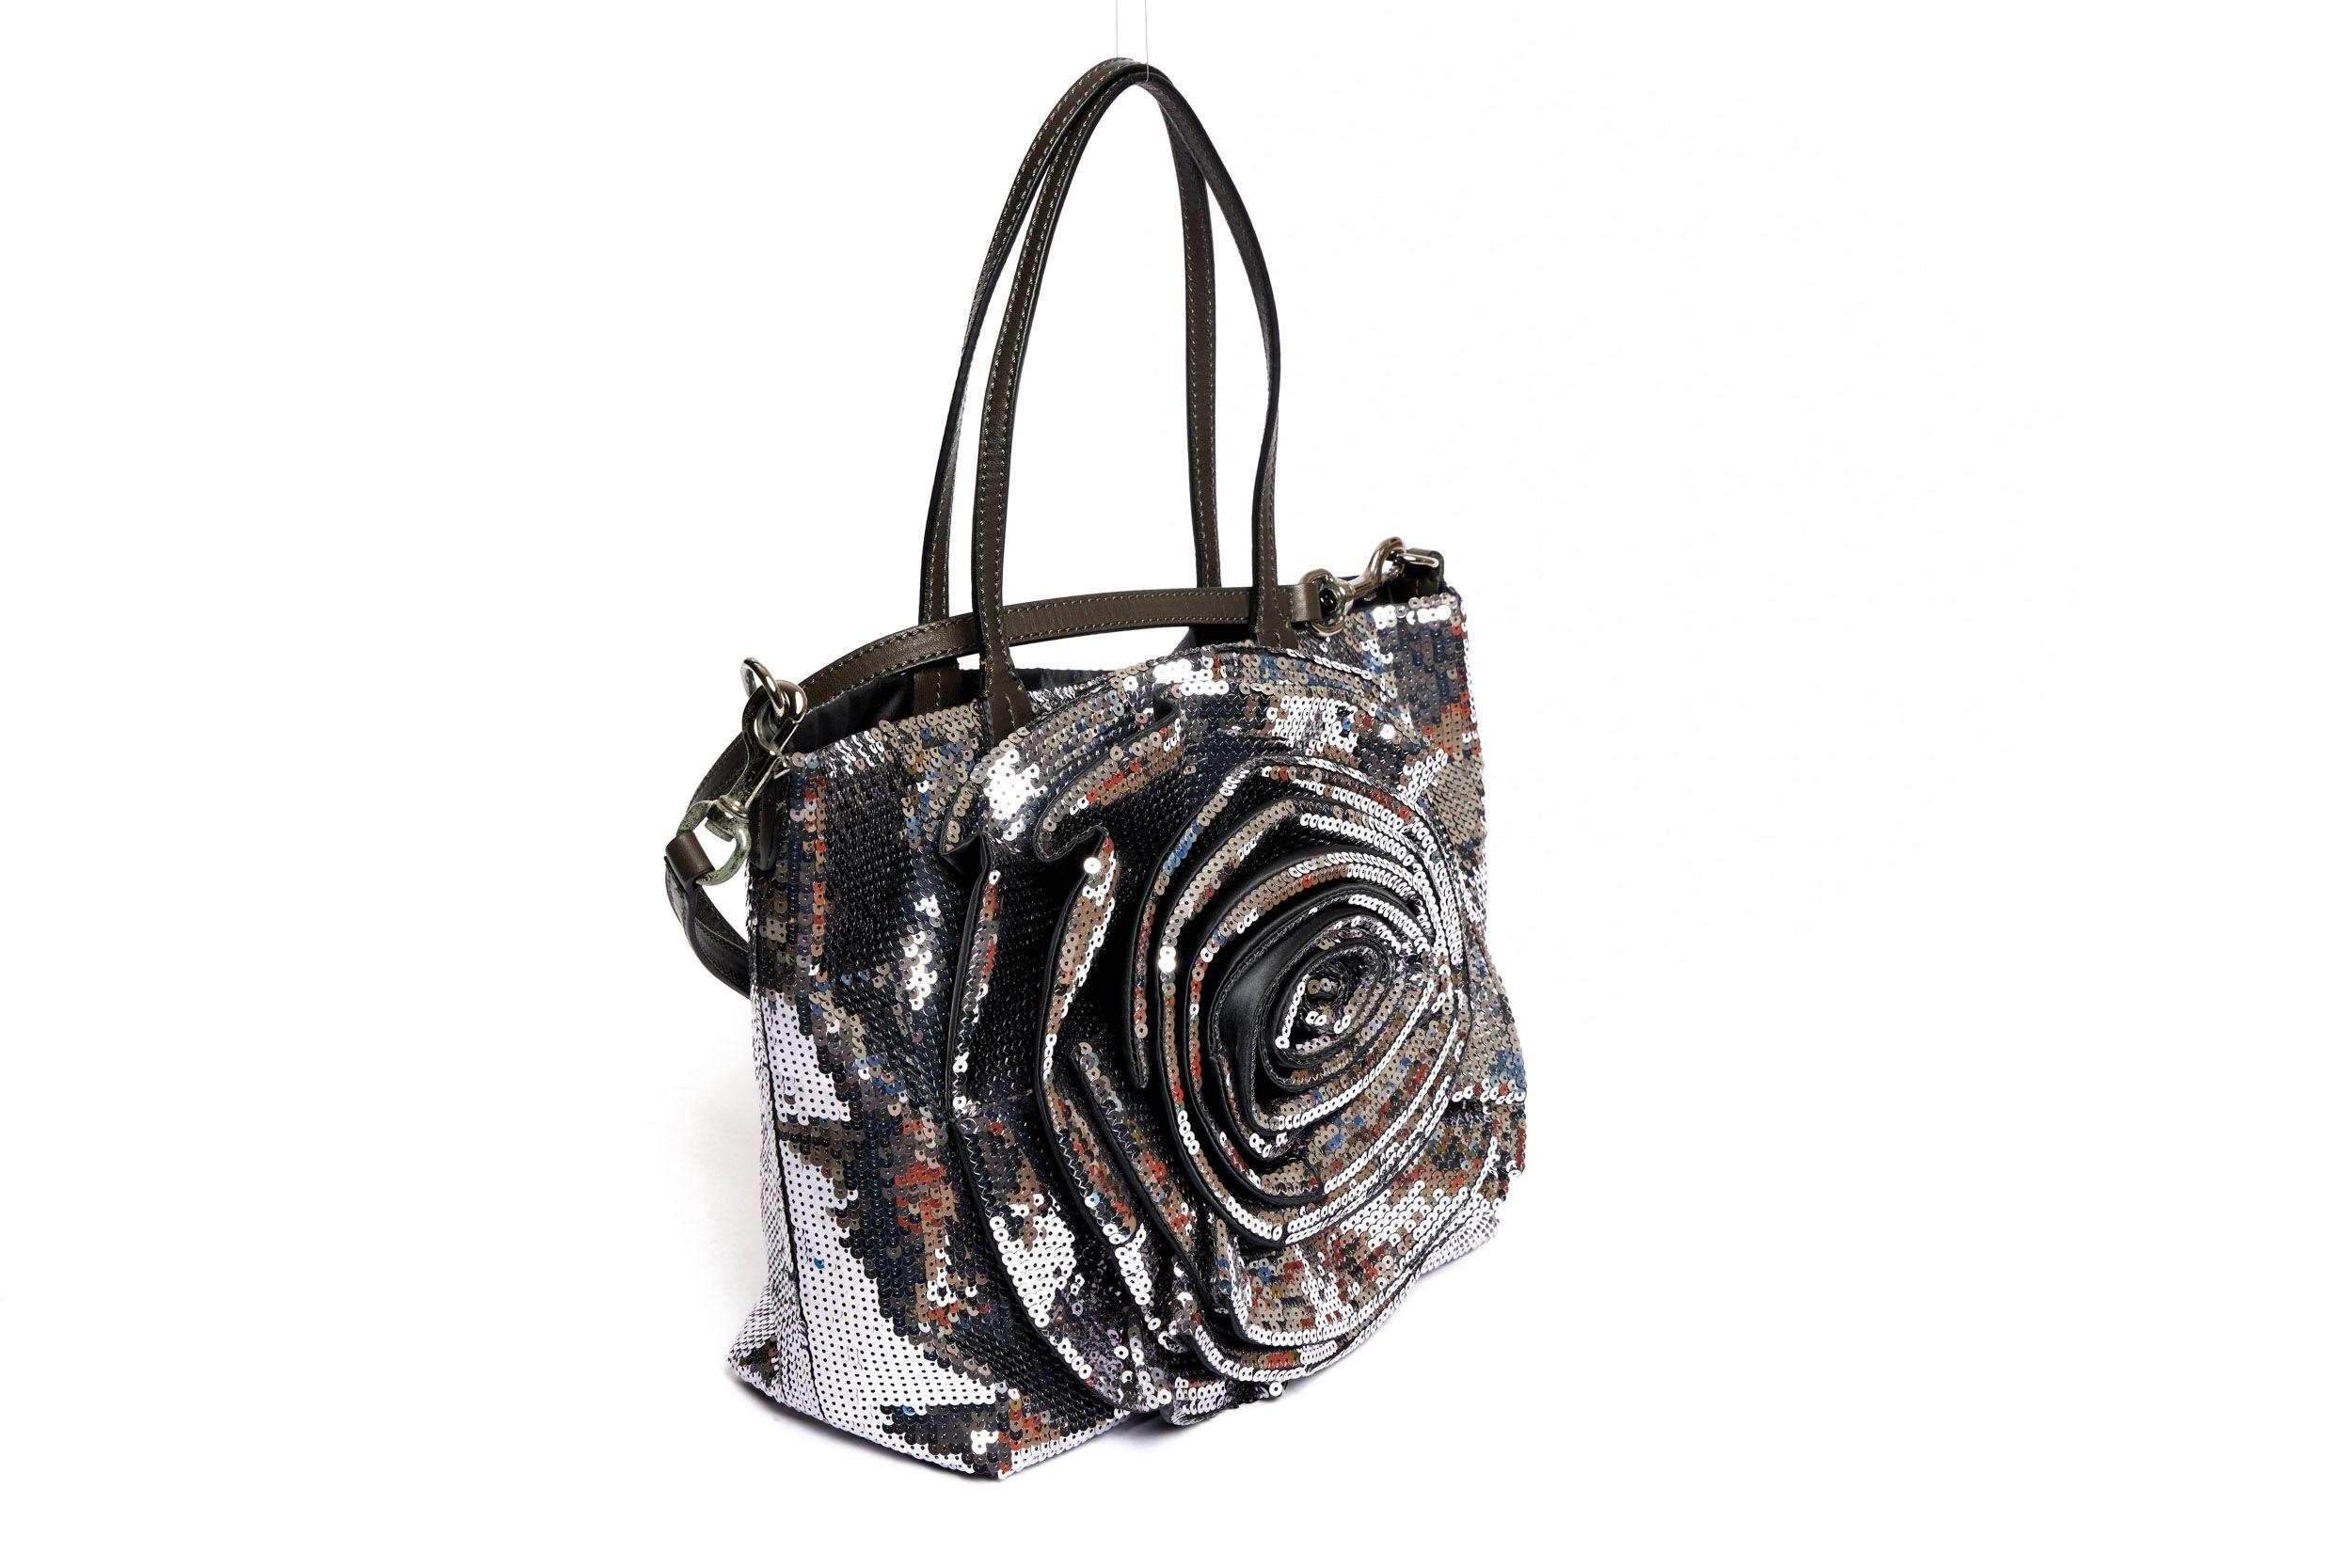 Valentino silver and grey large flower sequins bag in excellent condition. The interior is crafted of a shiny fabric and has one zipped pocket. There are two grey leather handle straps (8